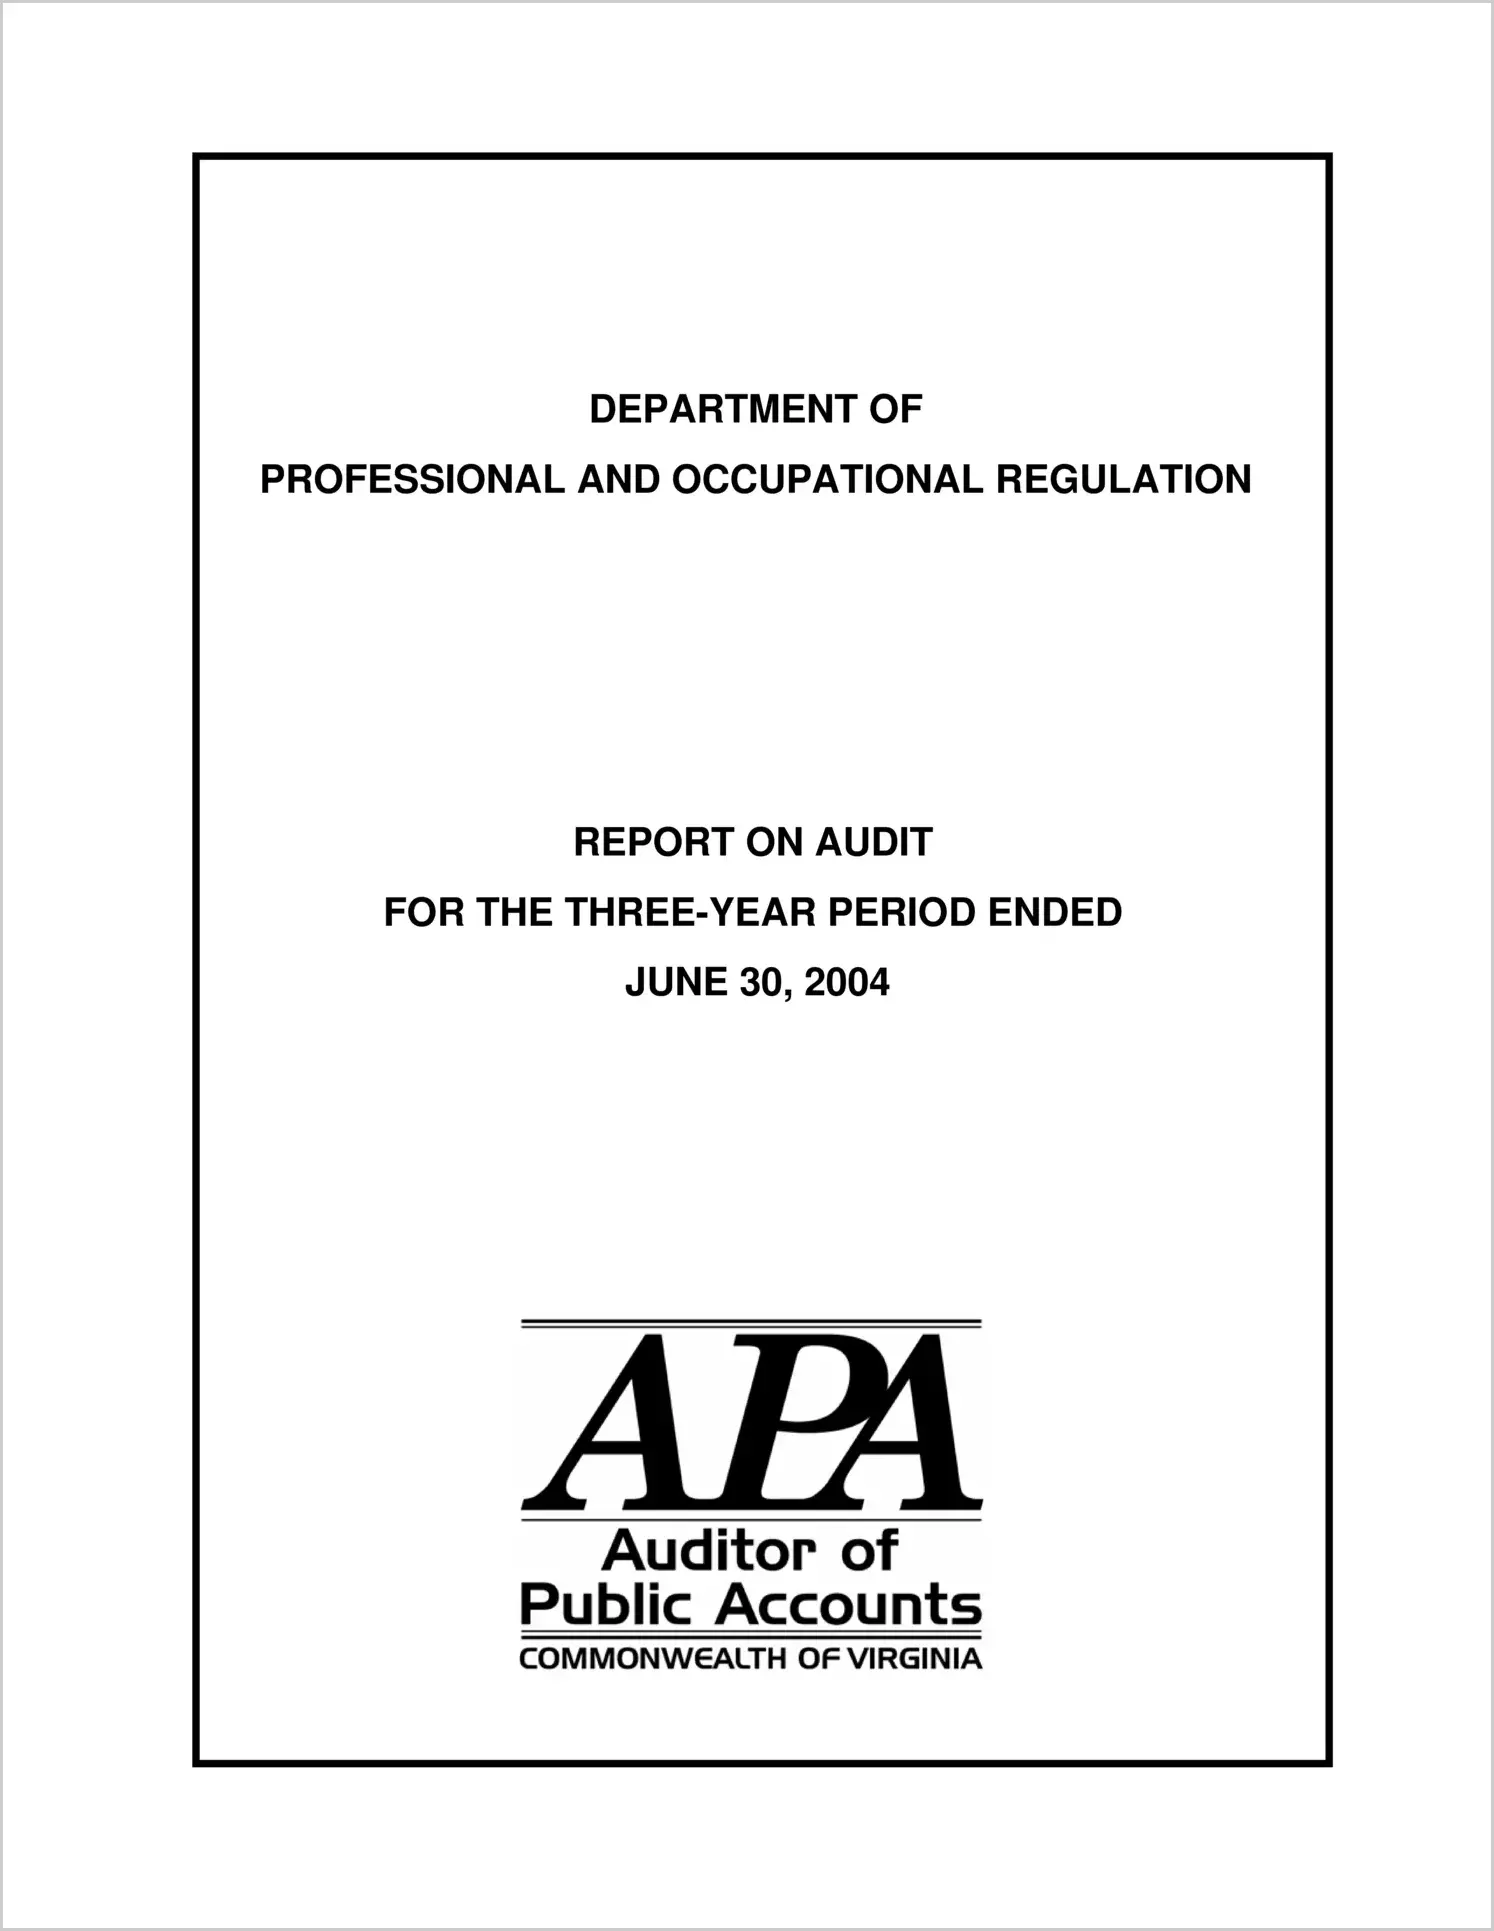 Department of Professional and Occupational Regulation for the three-year period ended June 30, 2004